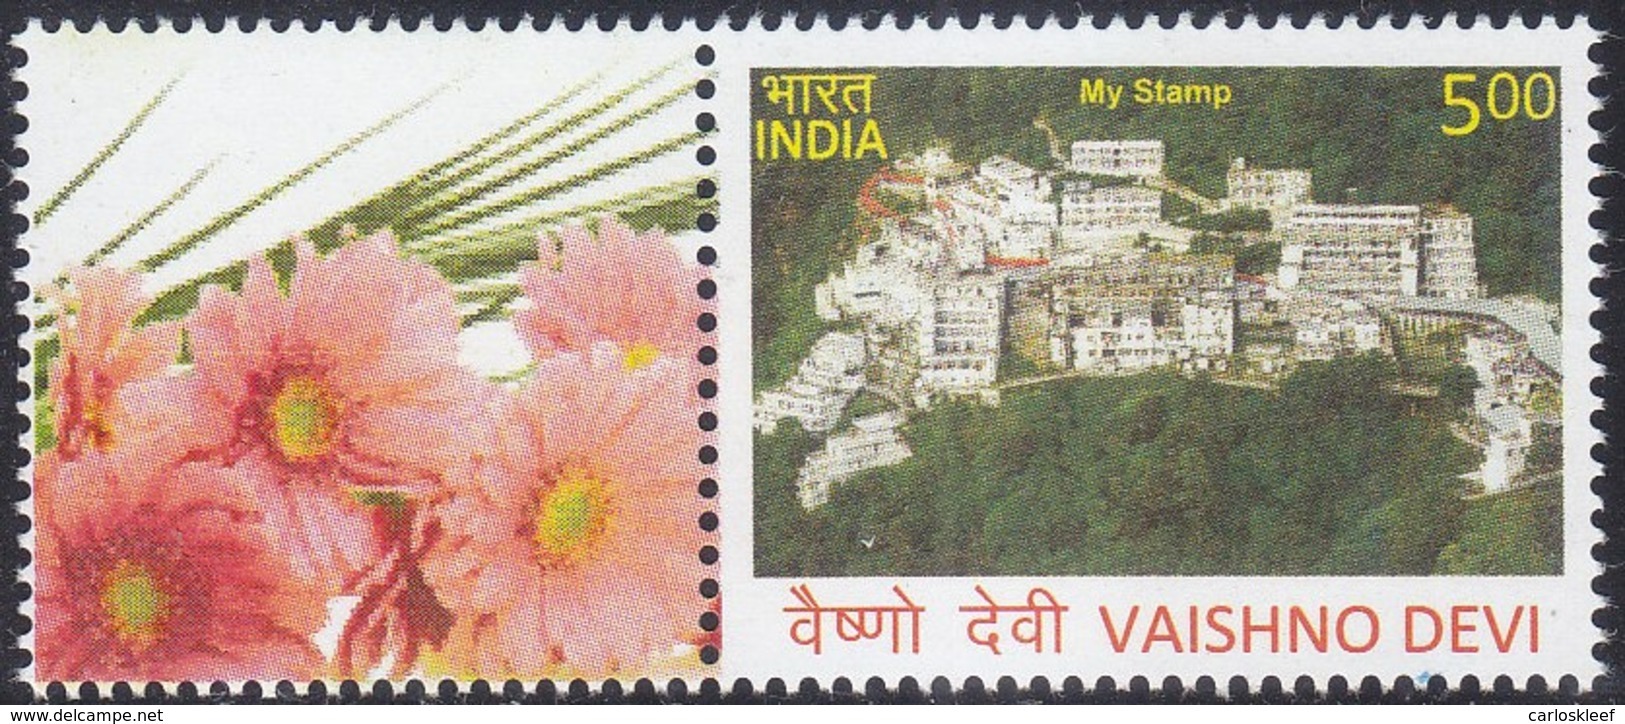 India - My Stamp New Issue 08-11-2017 (Yvert 2942) - Unused Stamps